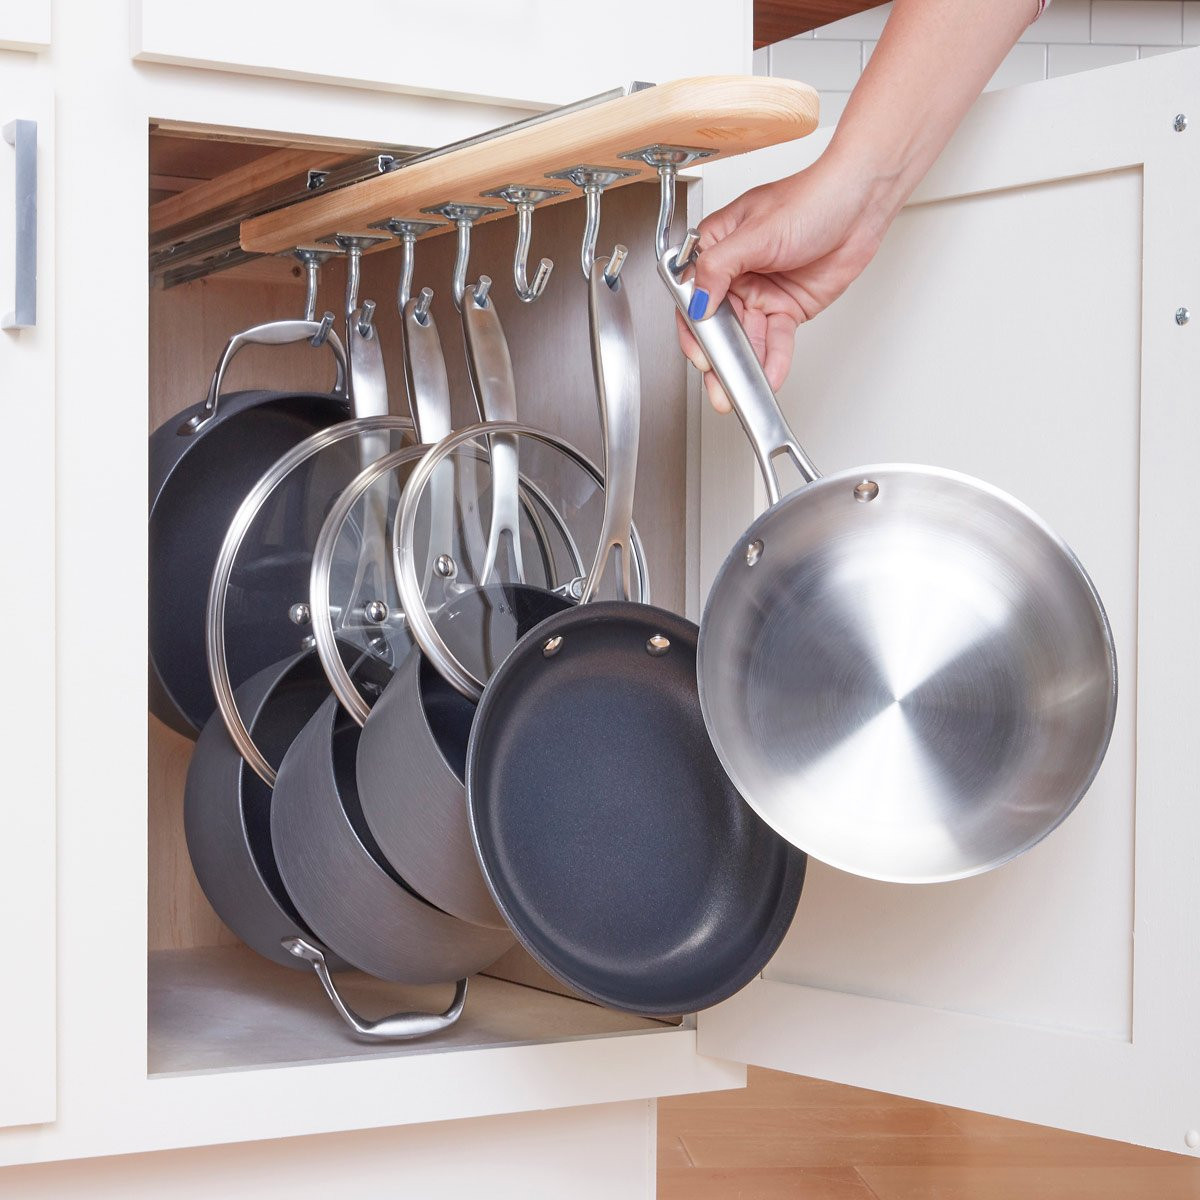 Pots And Pans Organizer DIY
 Kitchen Cabinet Storage Solutions DIY Pot and Pan Pullout